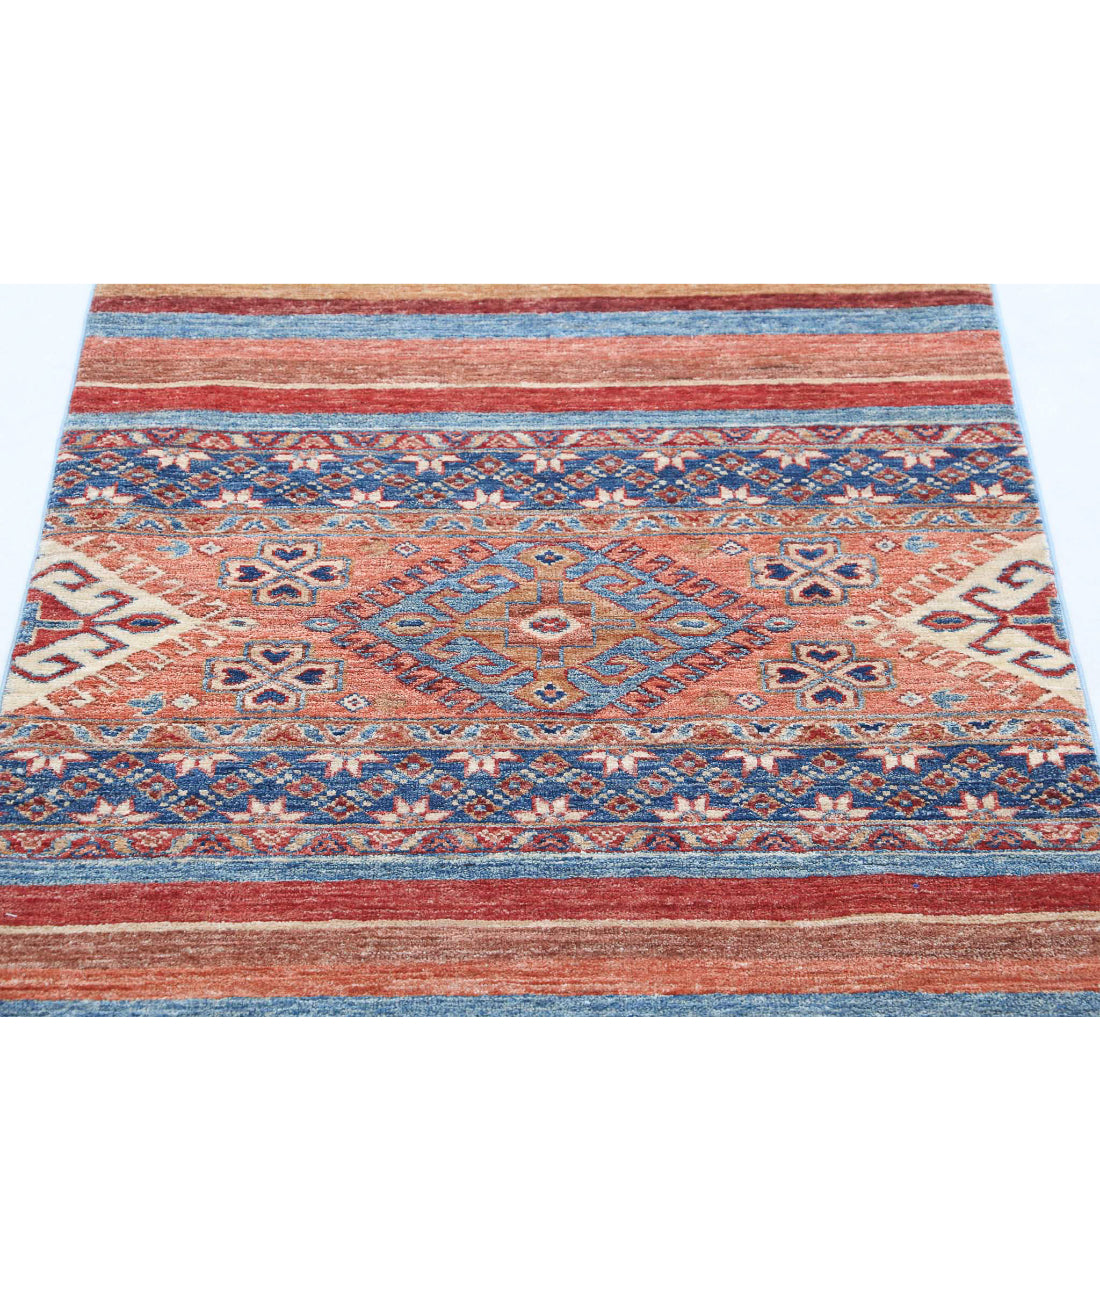 Hand Knotted Khurjeen Wool Rug - 2'8'' x 3'8'' 2'8'' x 3'8'' (80 X 110) / Multi / Multi